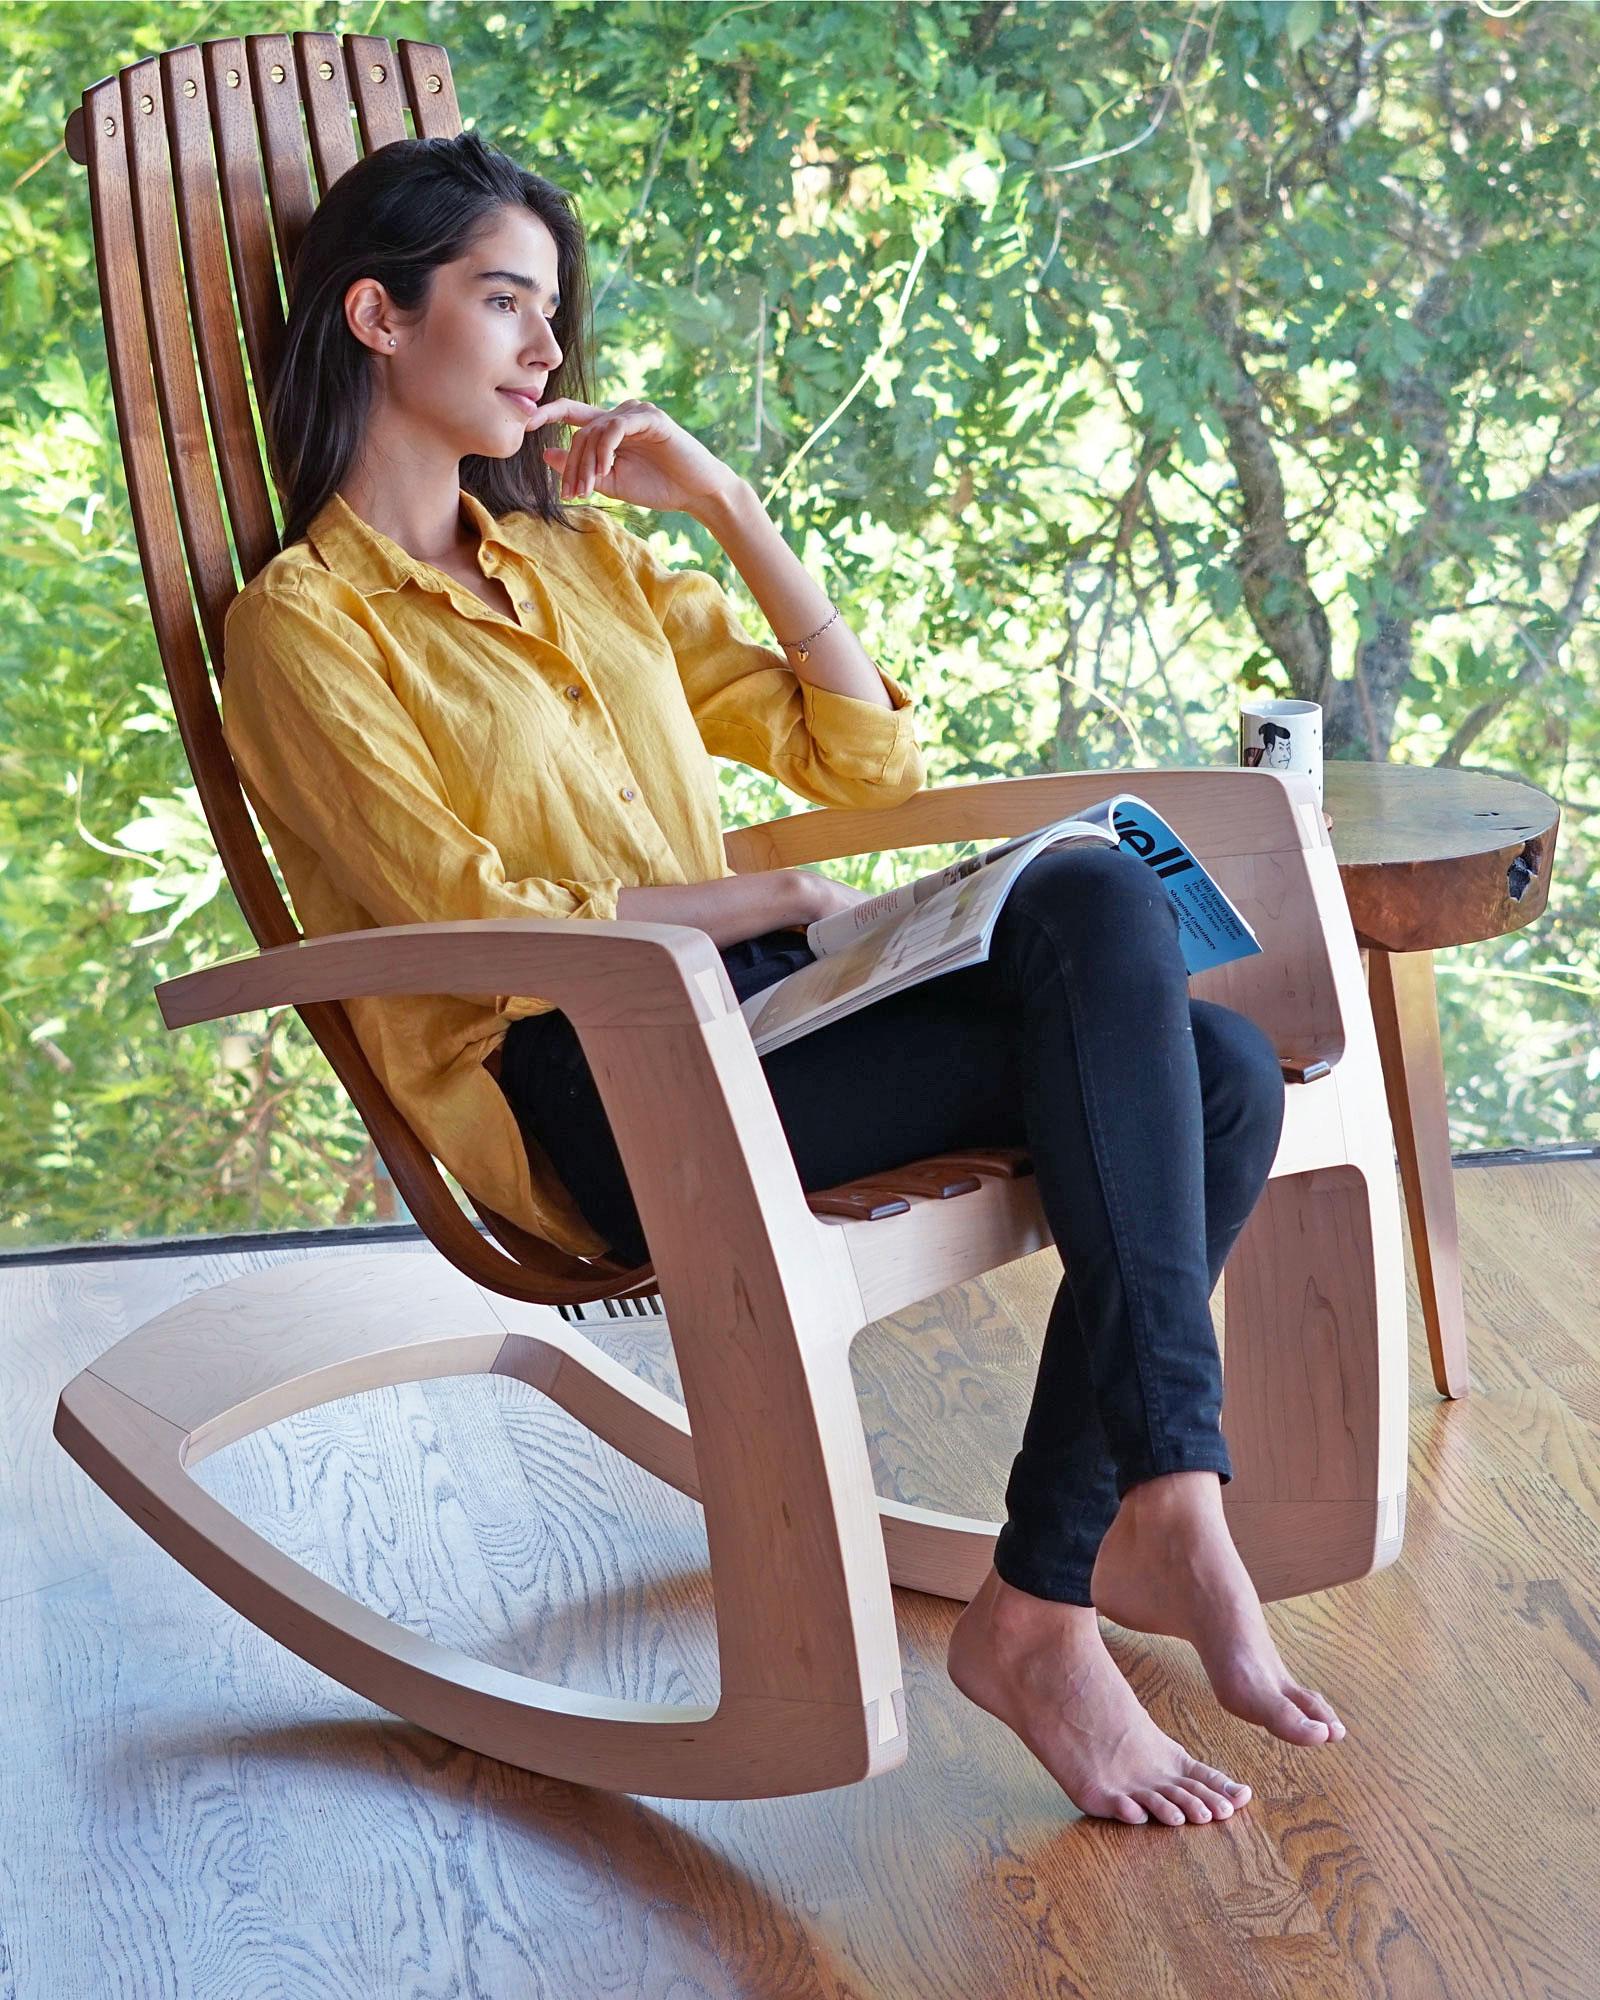 When we set out to design the modern rocking chair we followed a series of directives: it must be extremely comfortable with no upholstery. It must have a high enough back to allow a tall person to rest their head, it must have a sense of visual